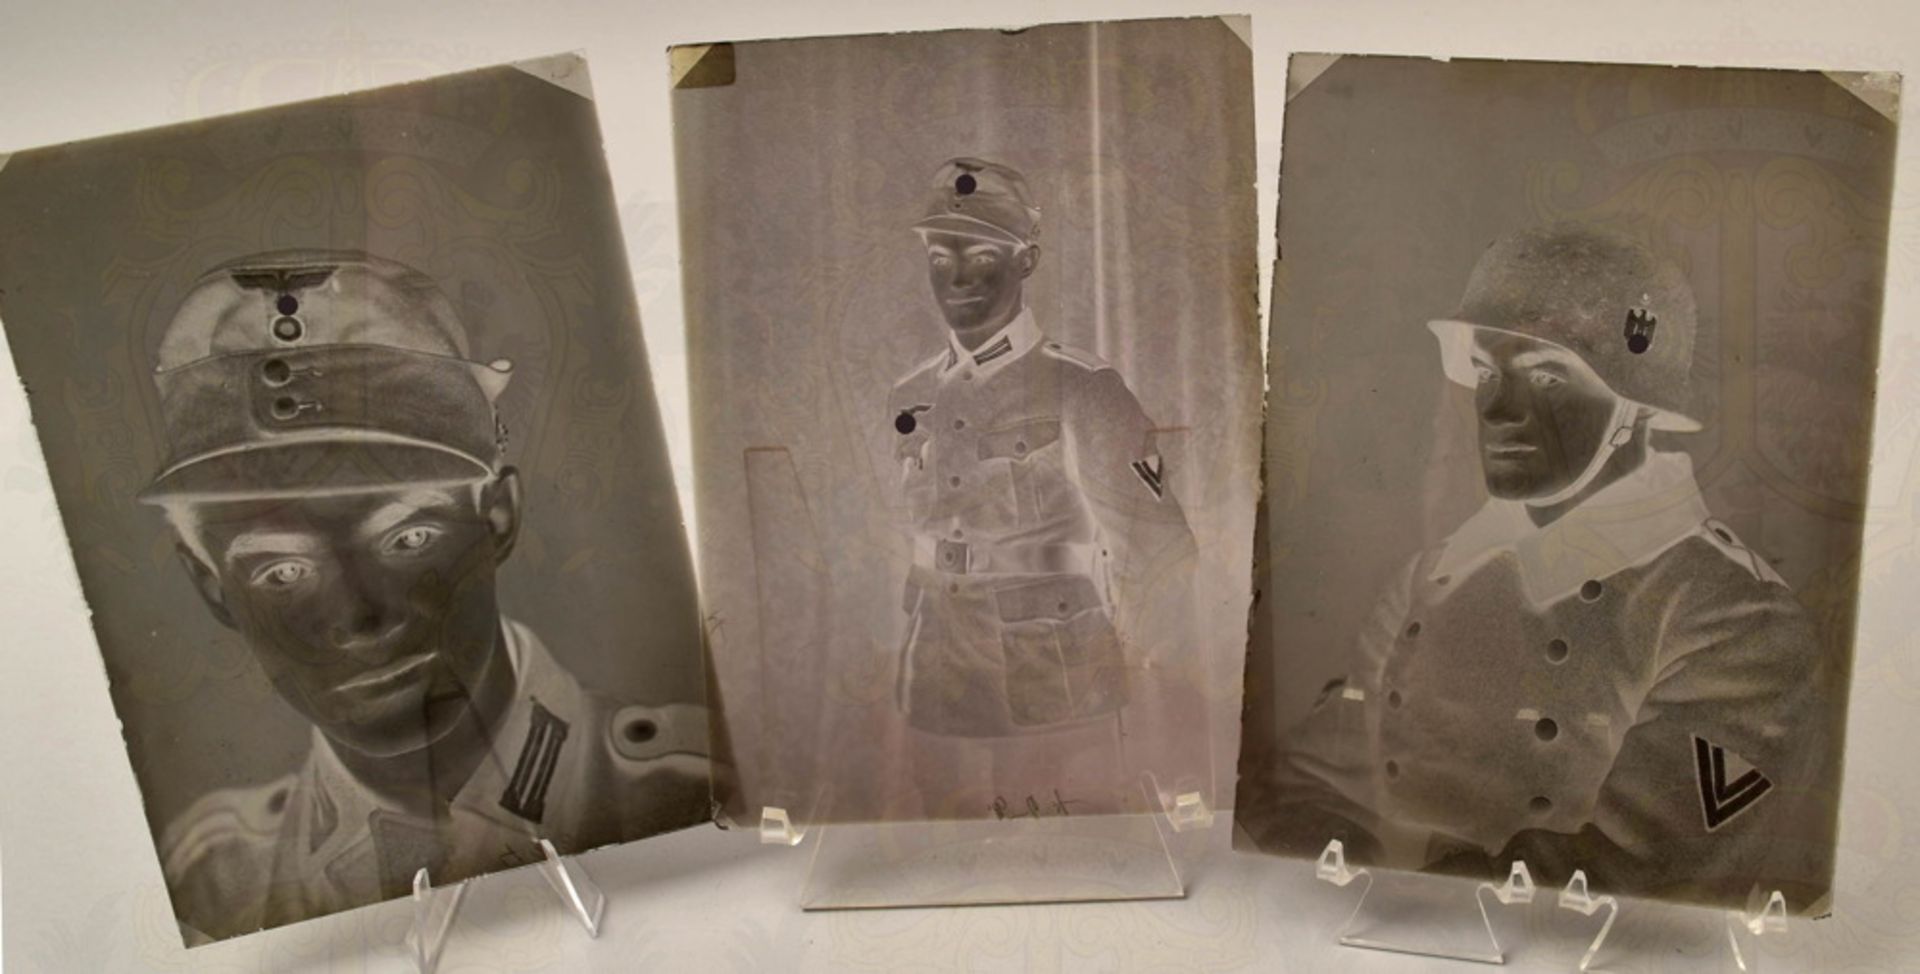 3 glass negatives of a mountain troops PFC about 1941